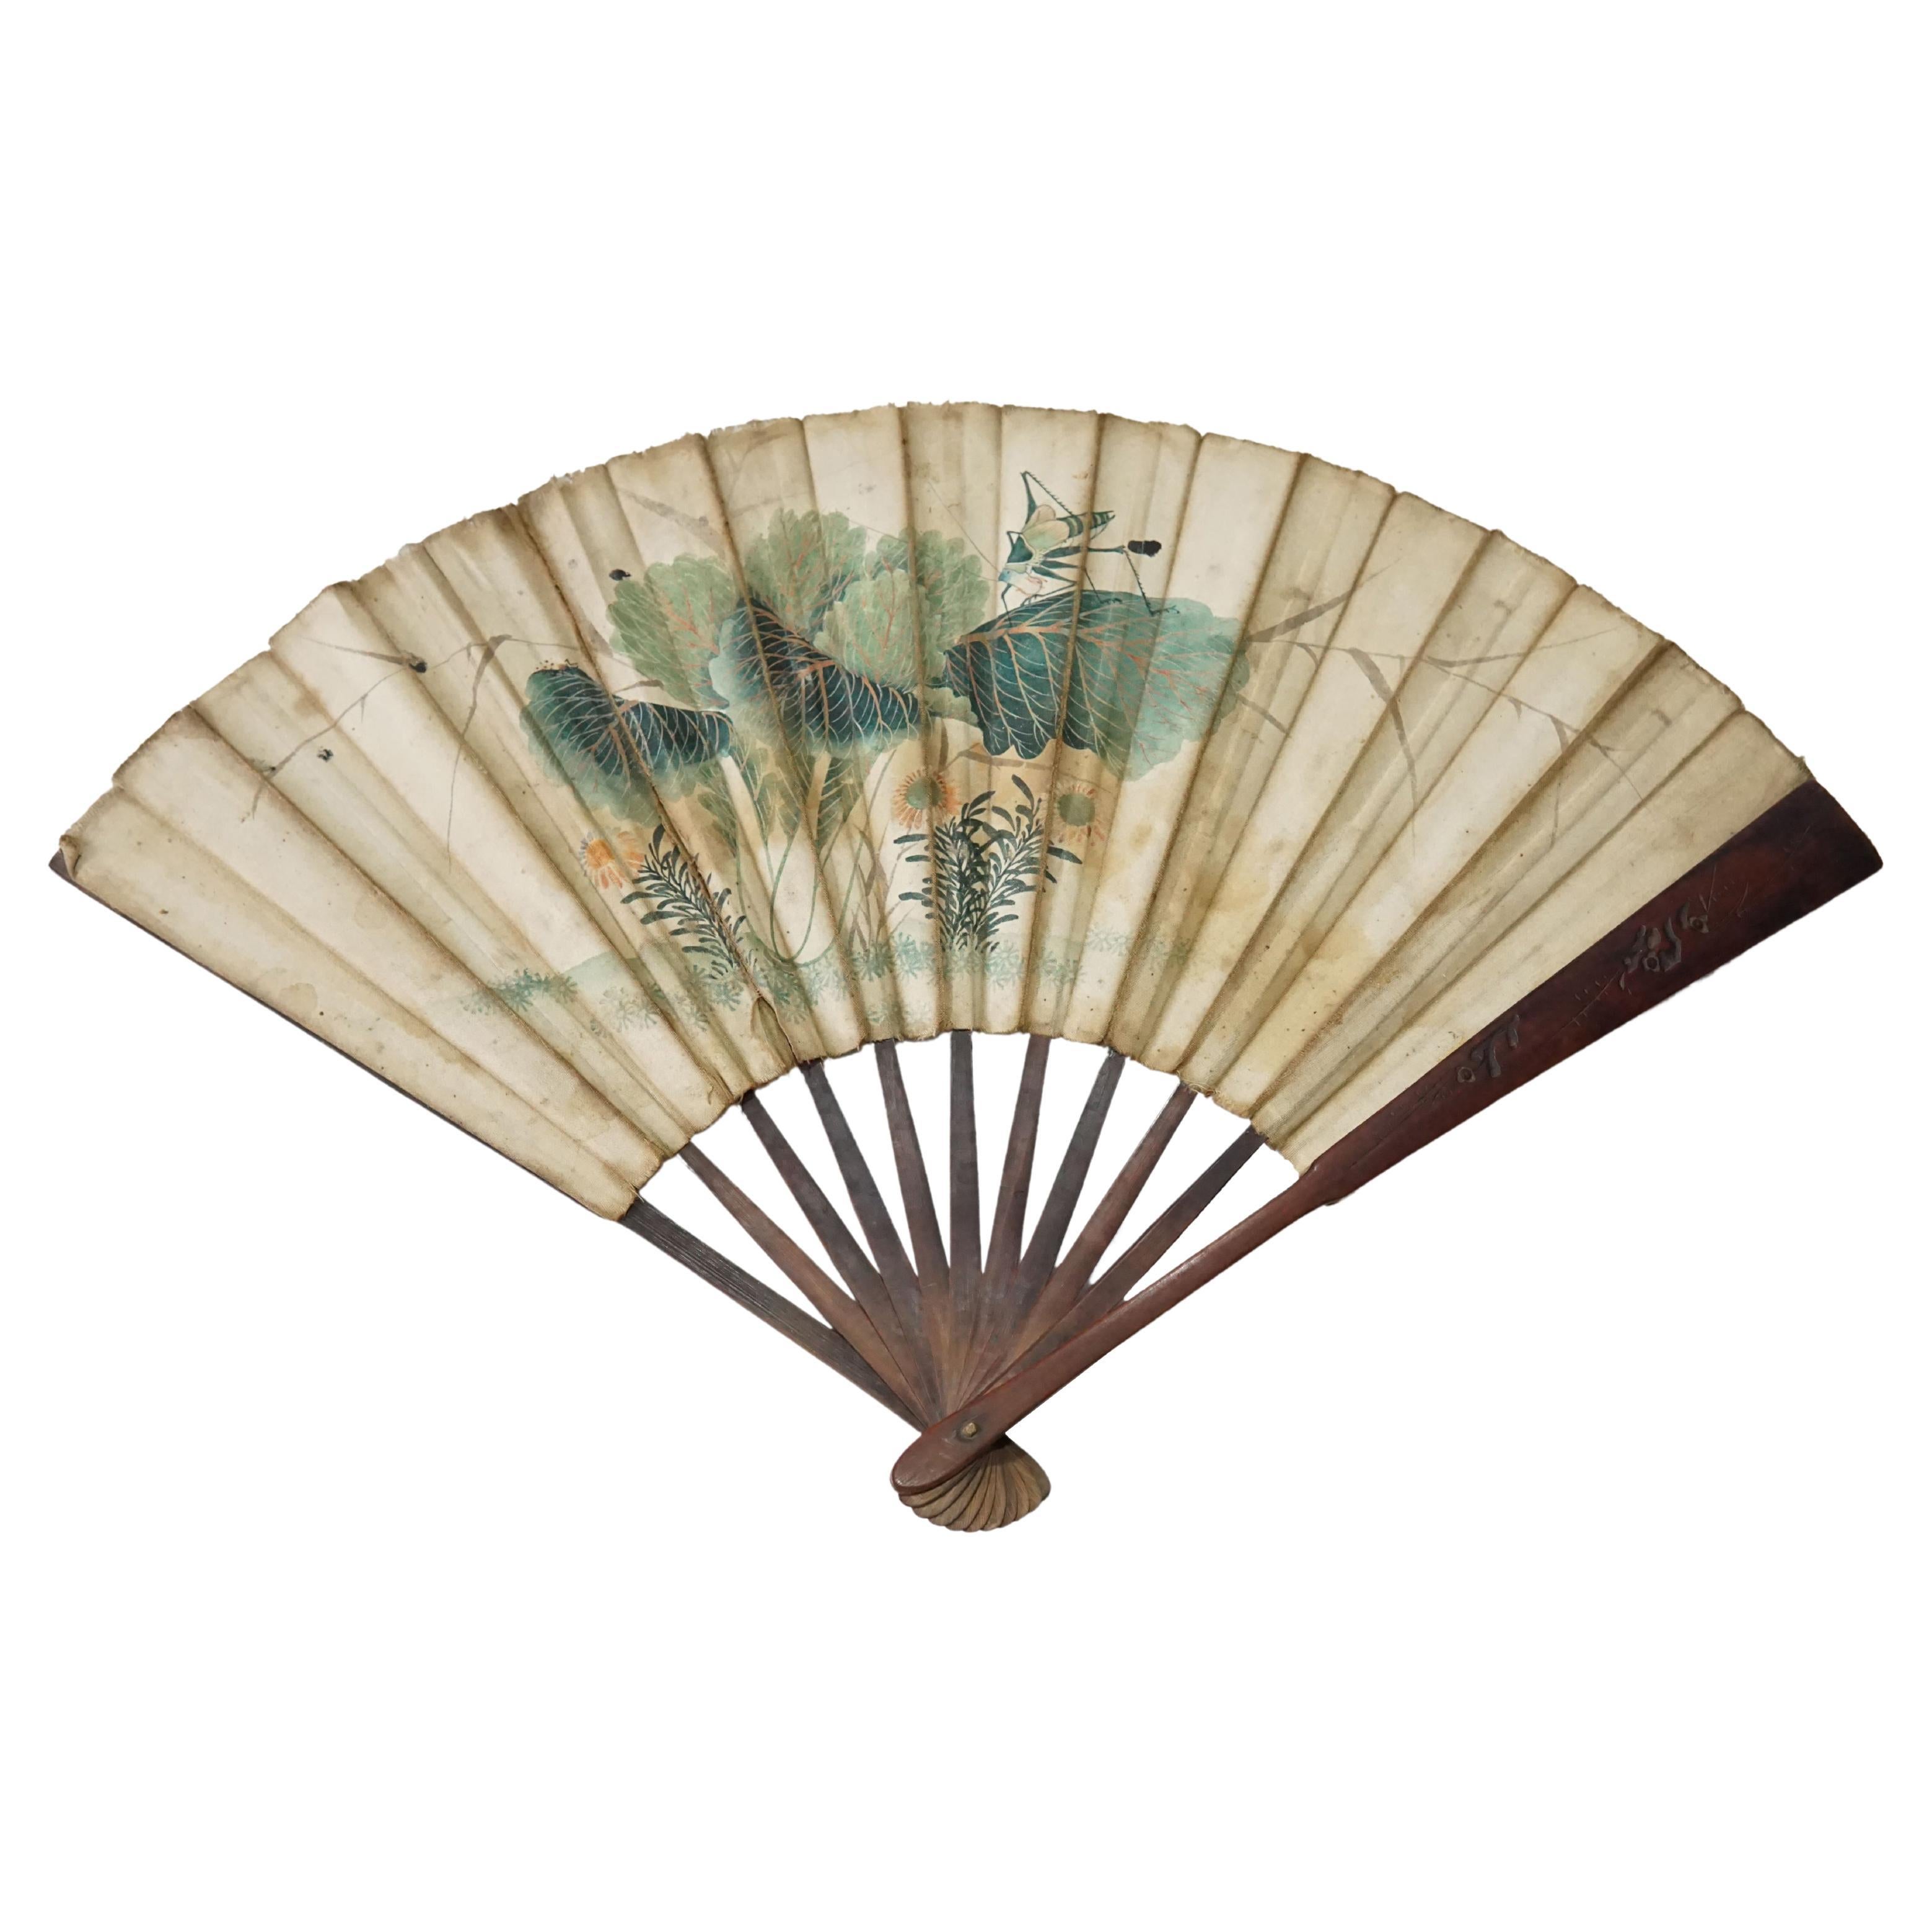 Antique Chinese Hand Painted Fan with Calligraphy, c. 1900 For Sale